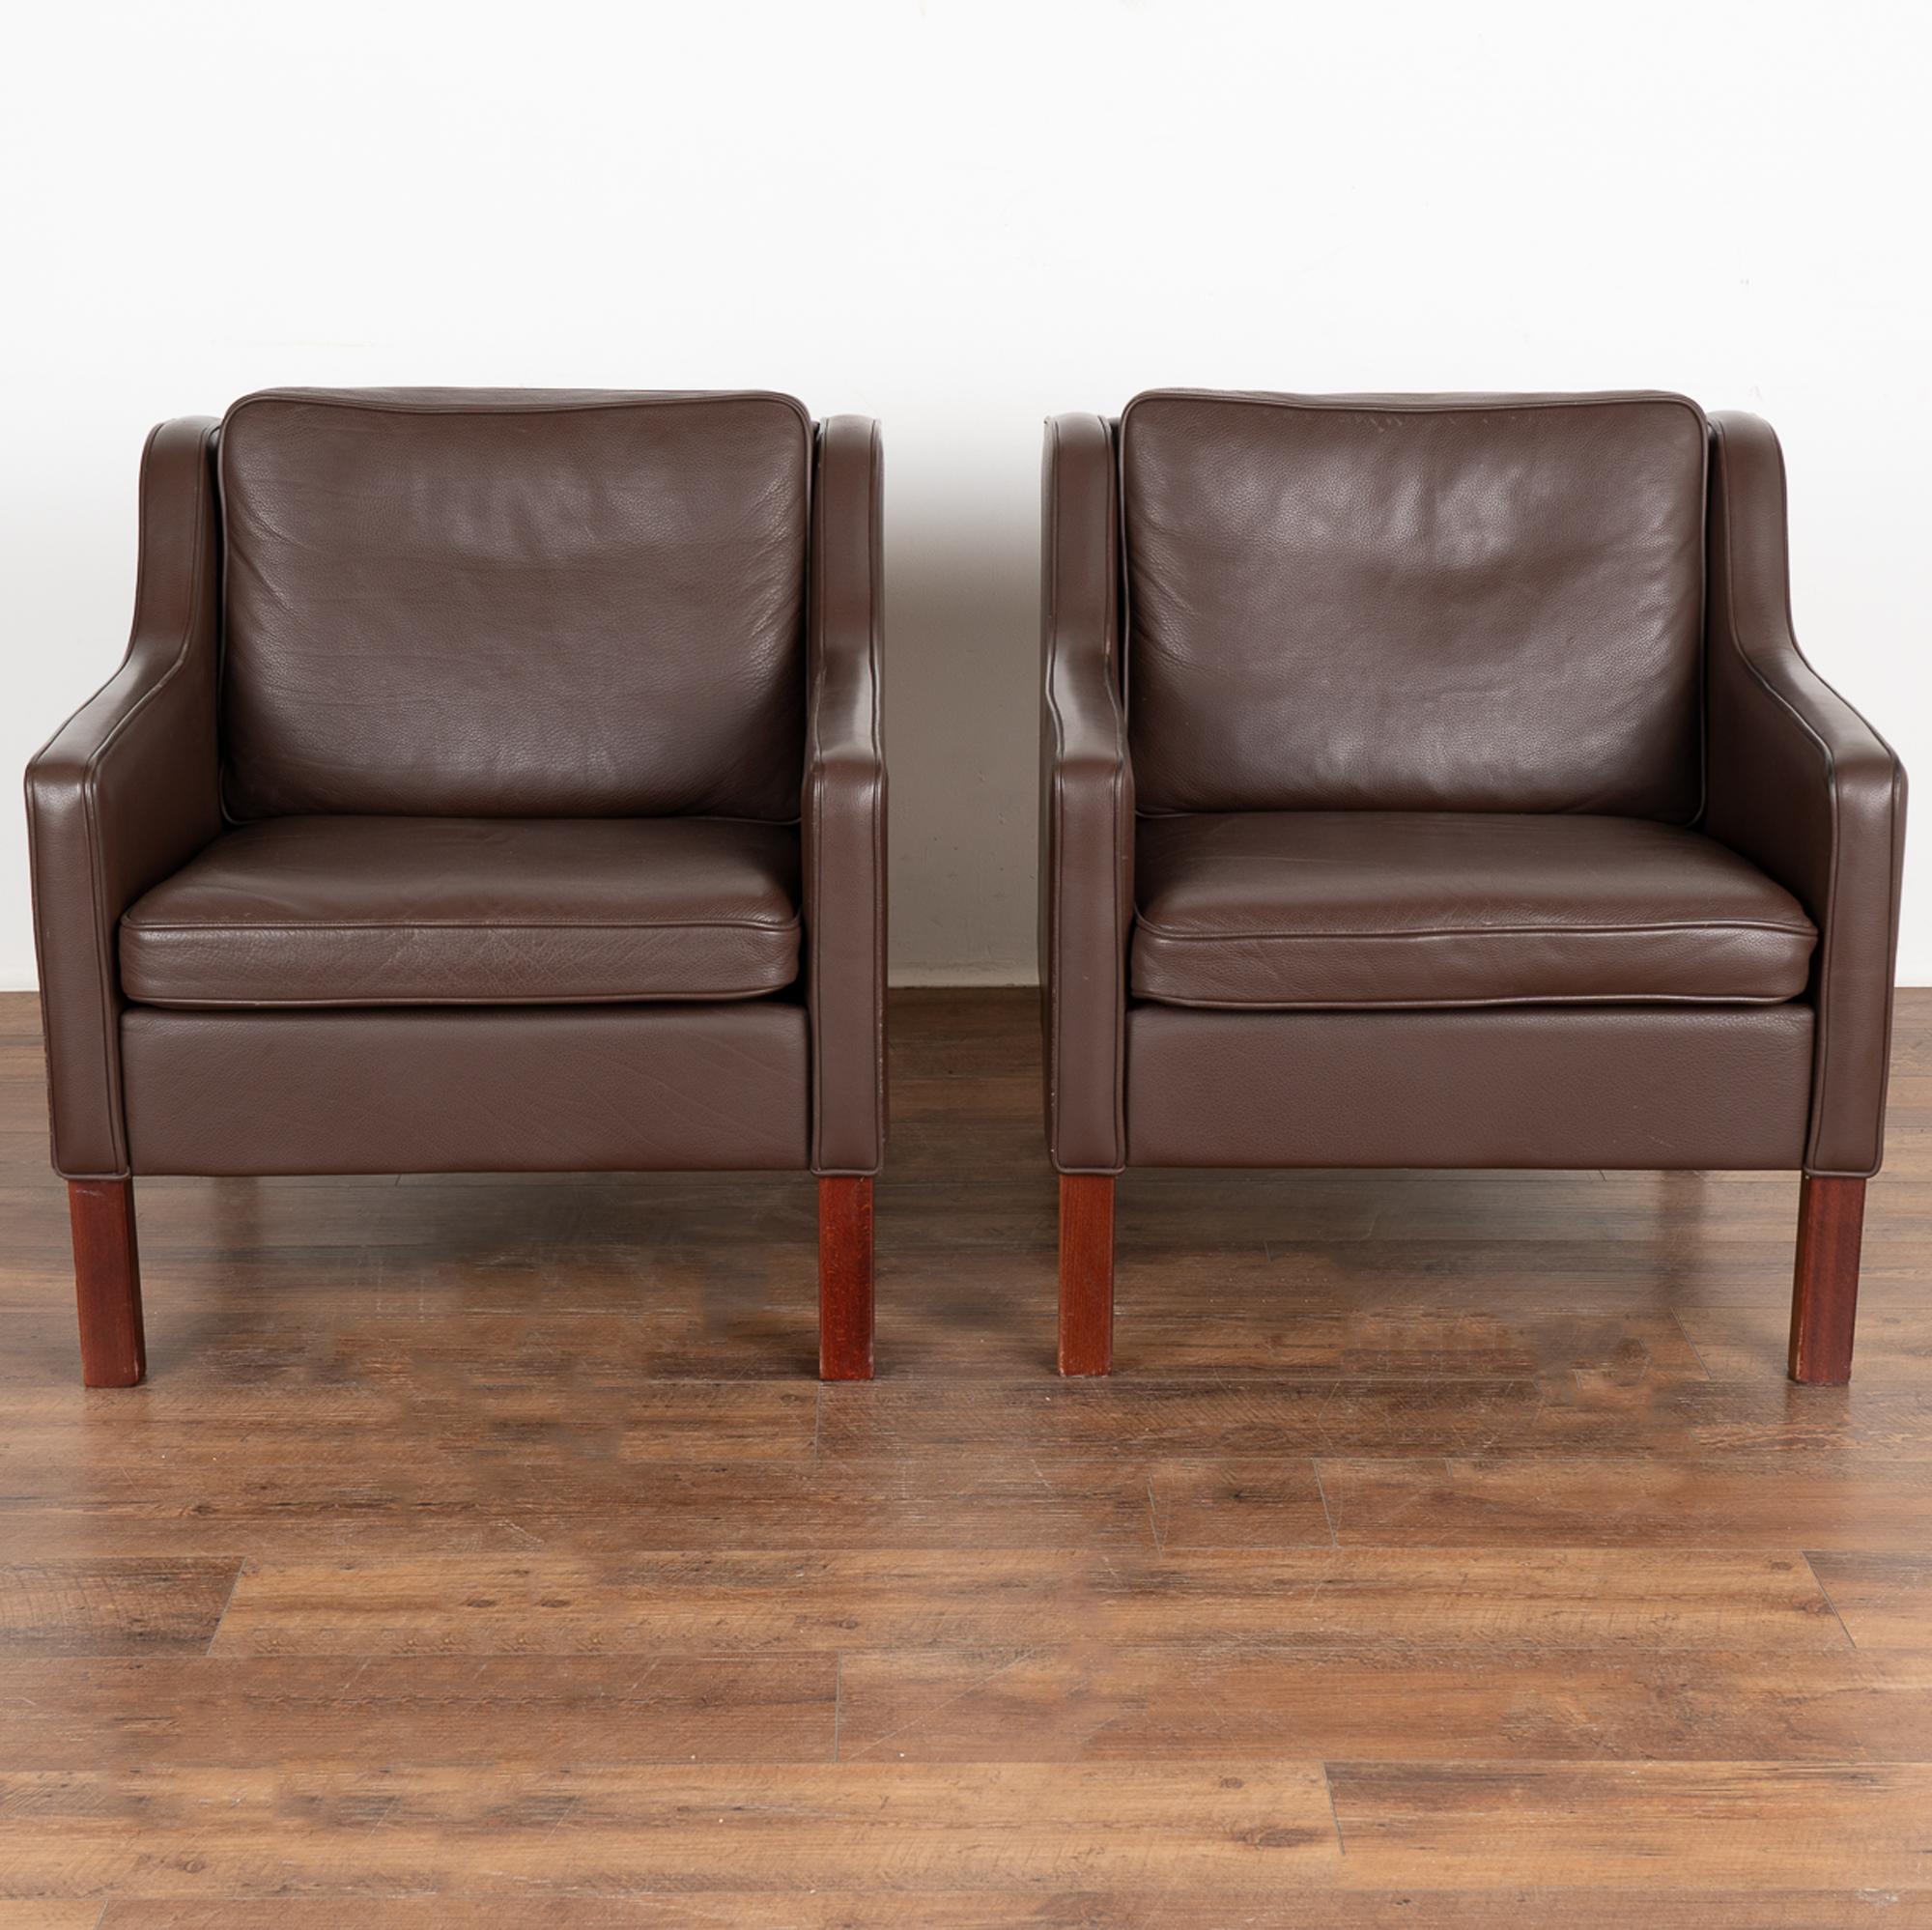 Mid-Century Modern Pair, Midcentury Brown Leather Arm Chairs, Denmark, circa 1960-70 For Sale